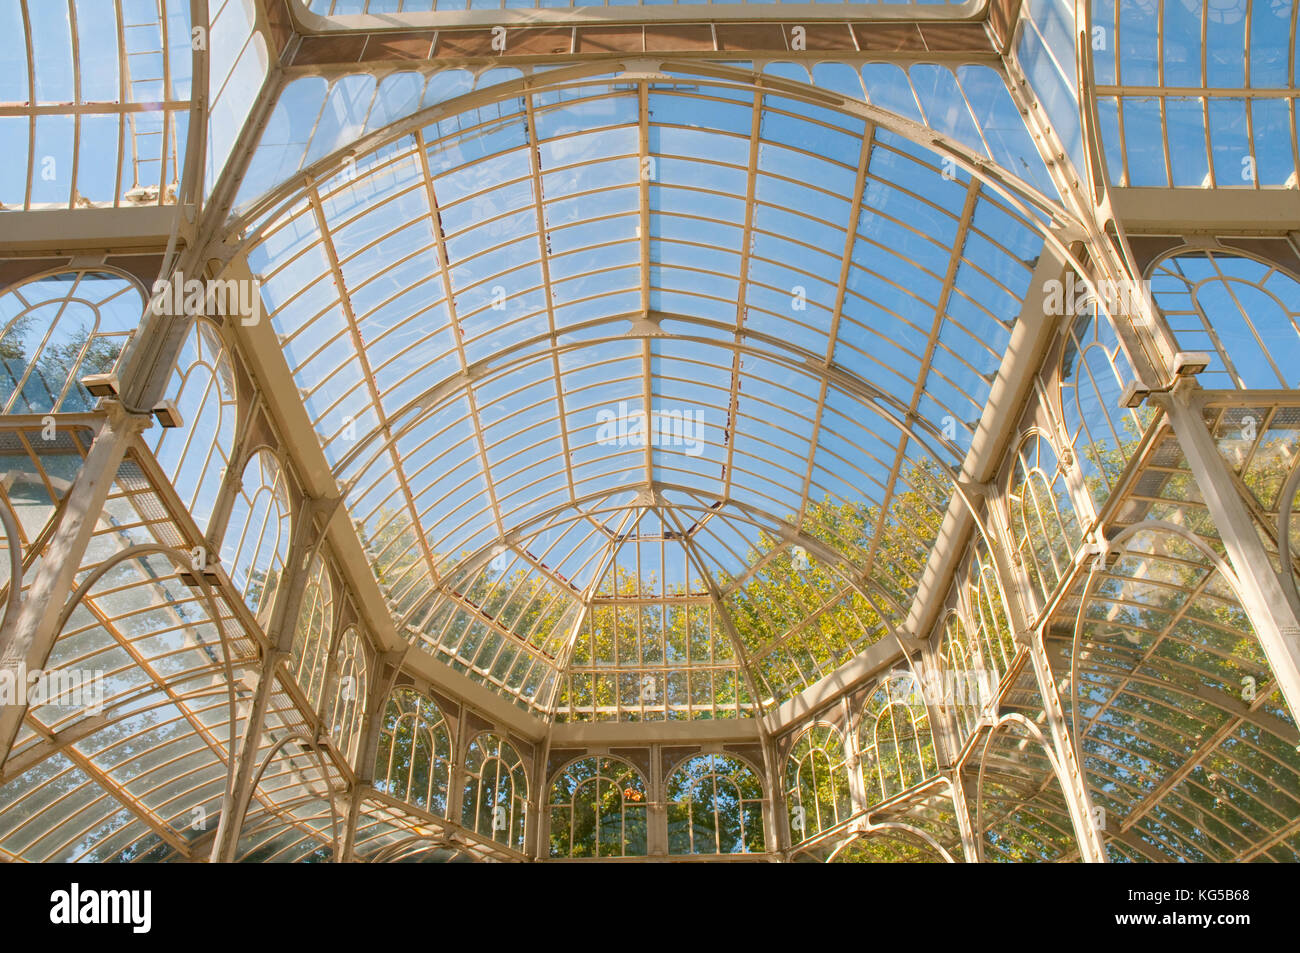 The Cristal Palace, indoor view. The Retiro park, Madrid, Spain. Stock Photo